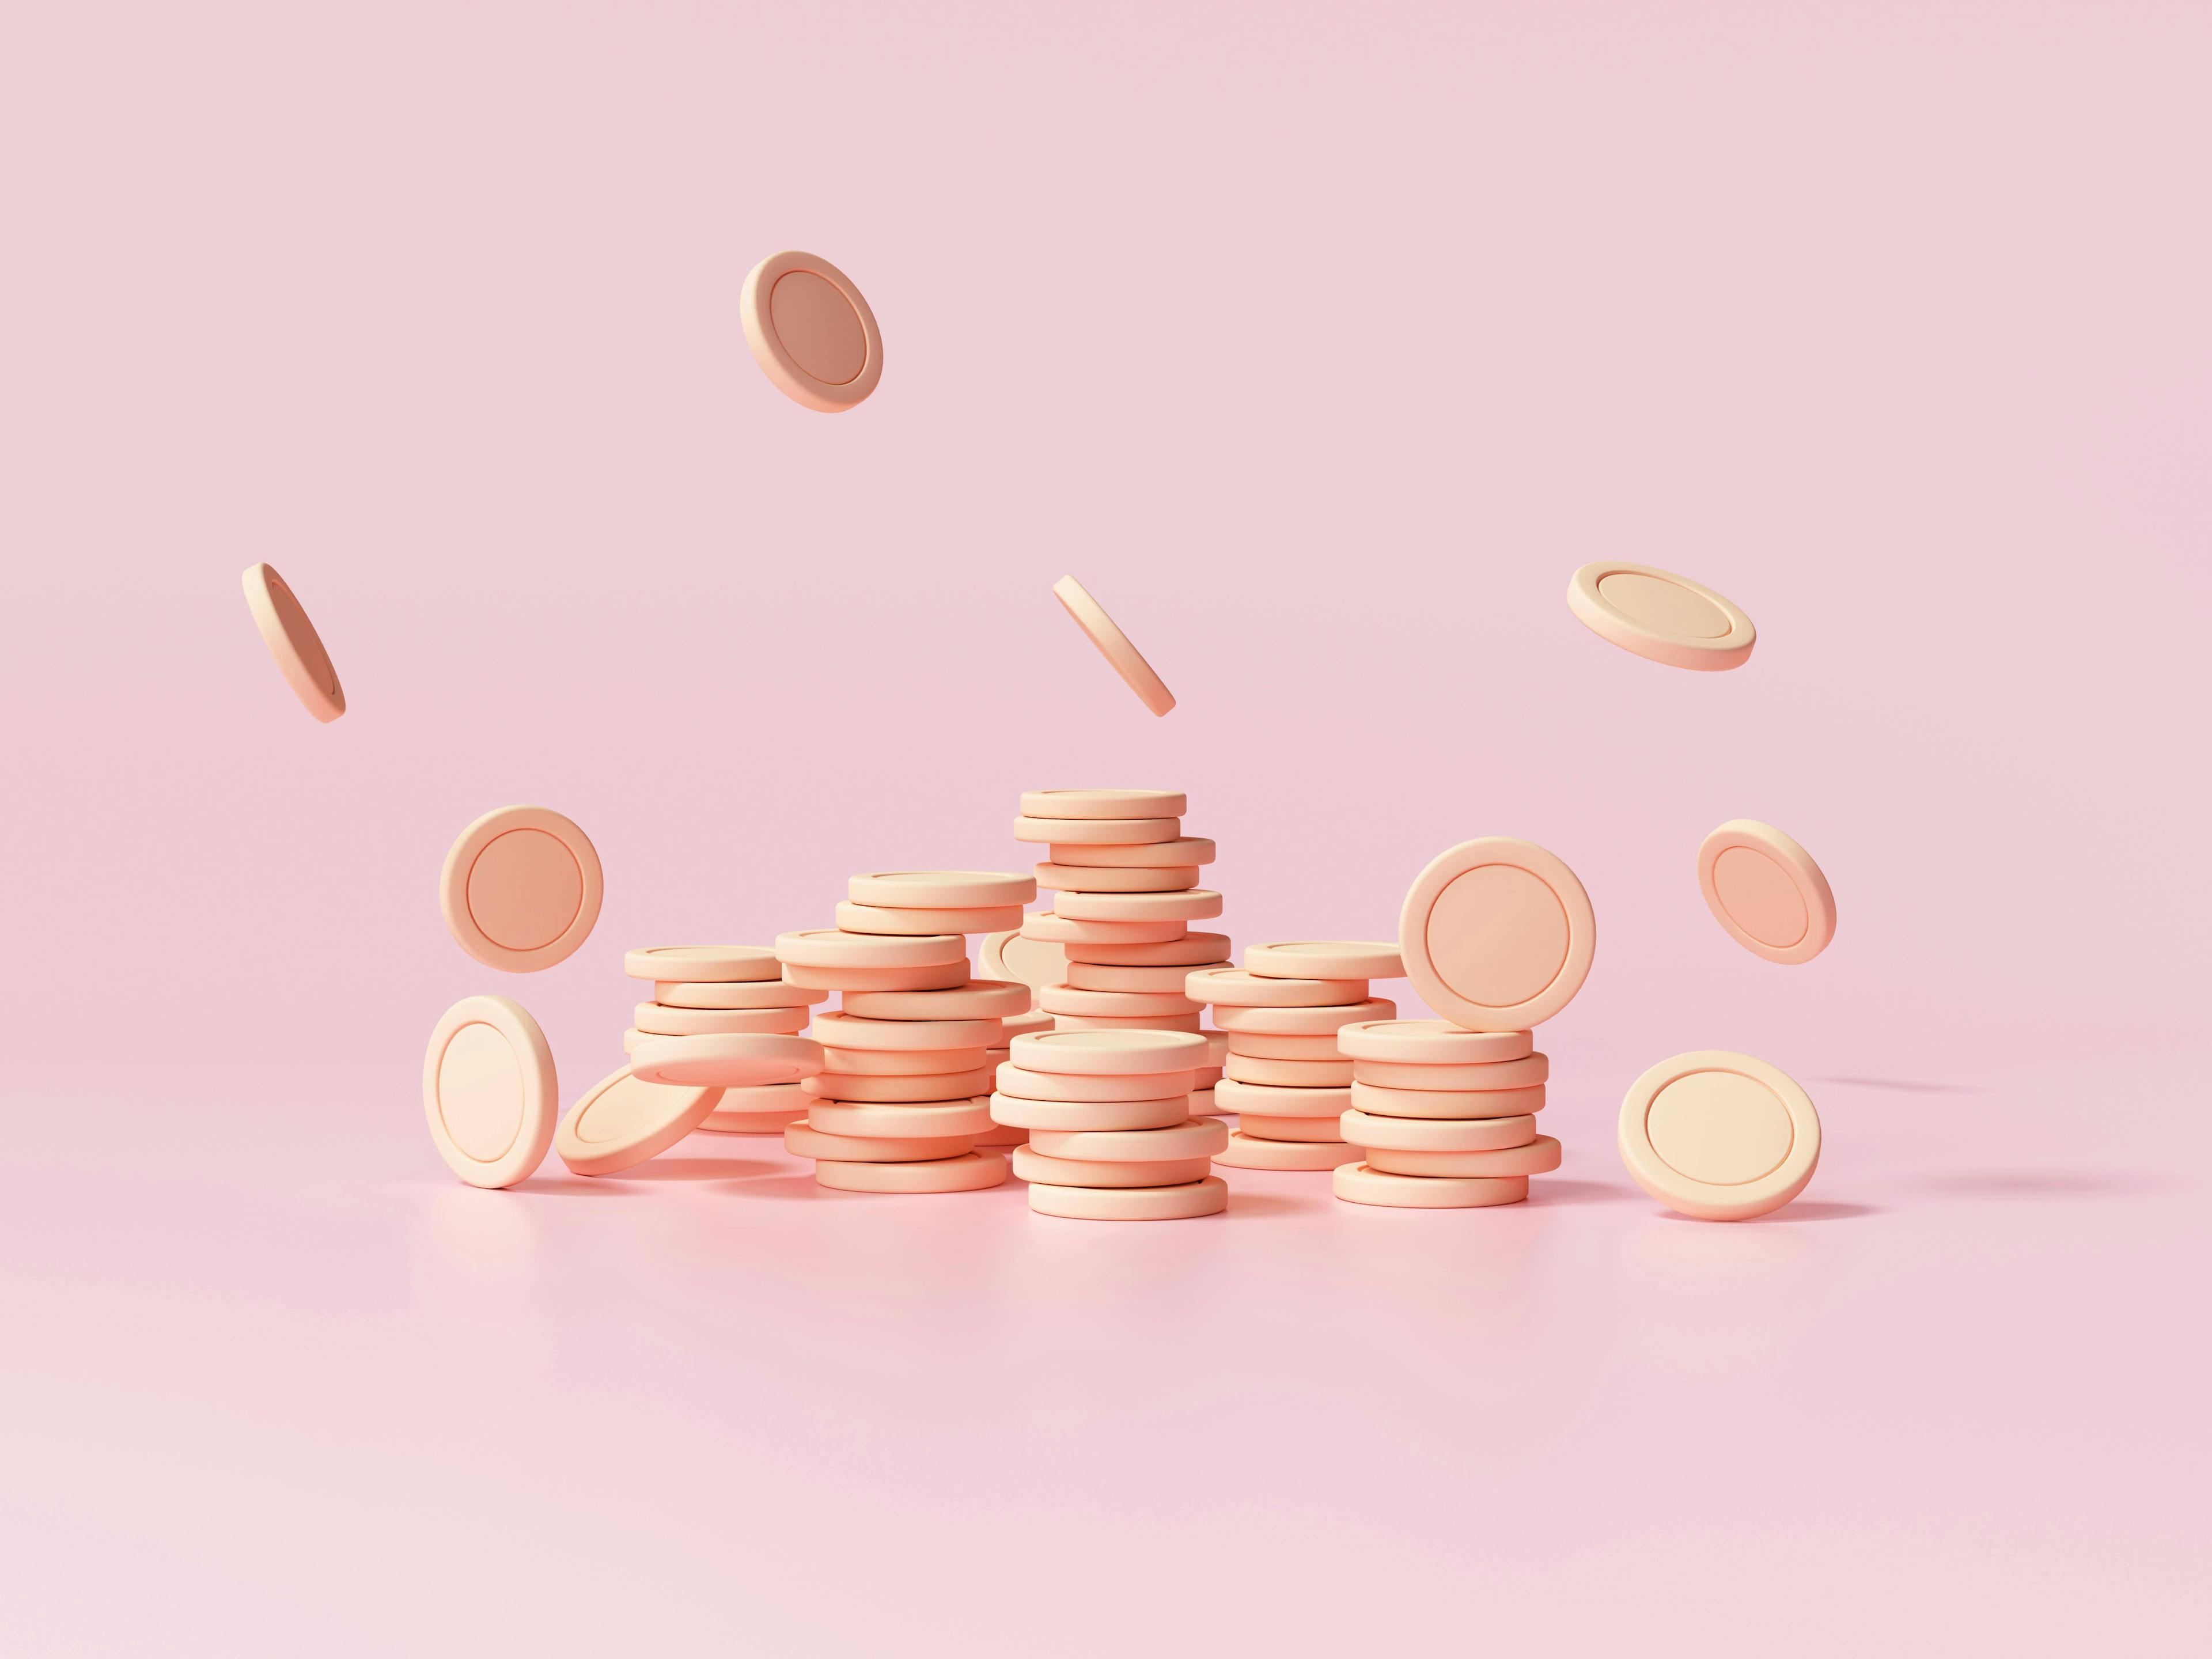 stack,cent,buy,sign,accounting,3d,growing,bank,white,price,golden,payment,investing,savings,stock,cash,group,statistic,investment,economy,market,closeup,background,success,deposit,coin,loan,pink,financial,concept,isolated,save,yellow,banking,gold,currency,piggy,render,earning,wealth,falling,business,rich,economics,money,fund,growth,illustration,shiny,finance sweets food